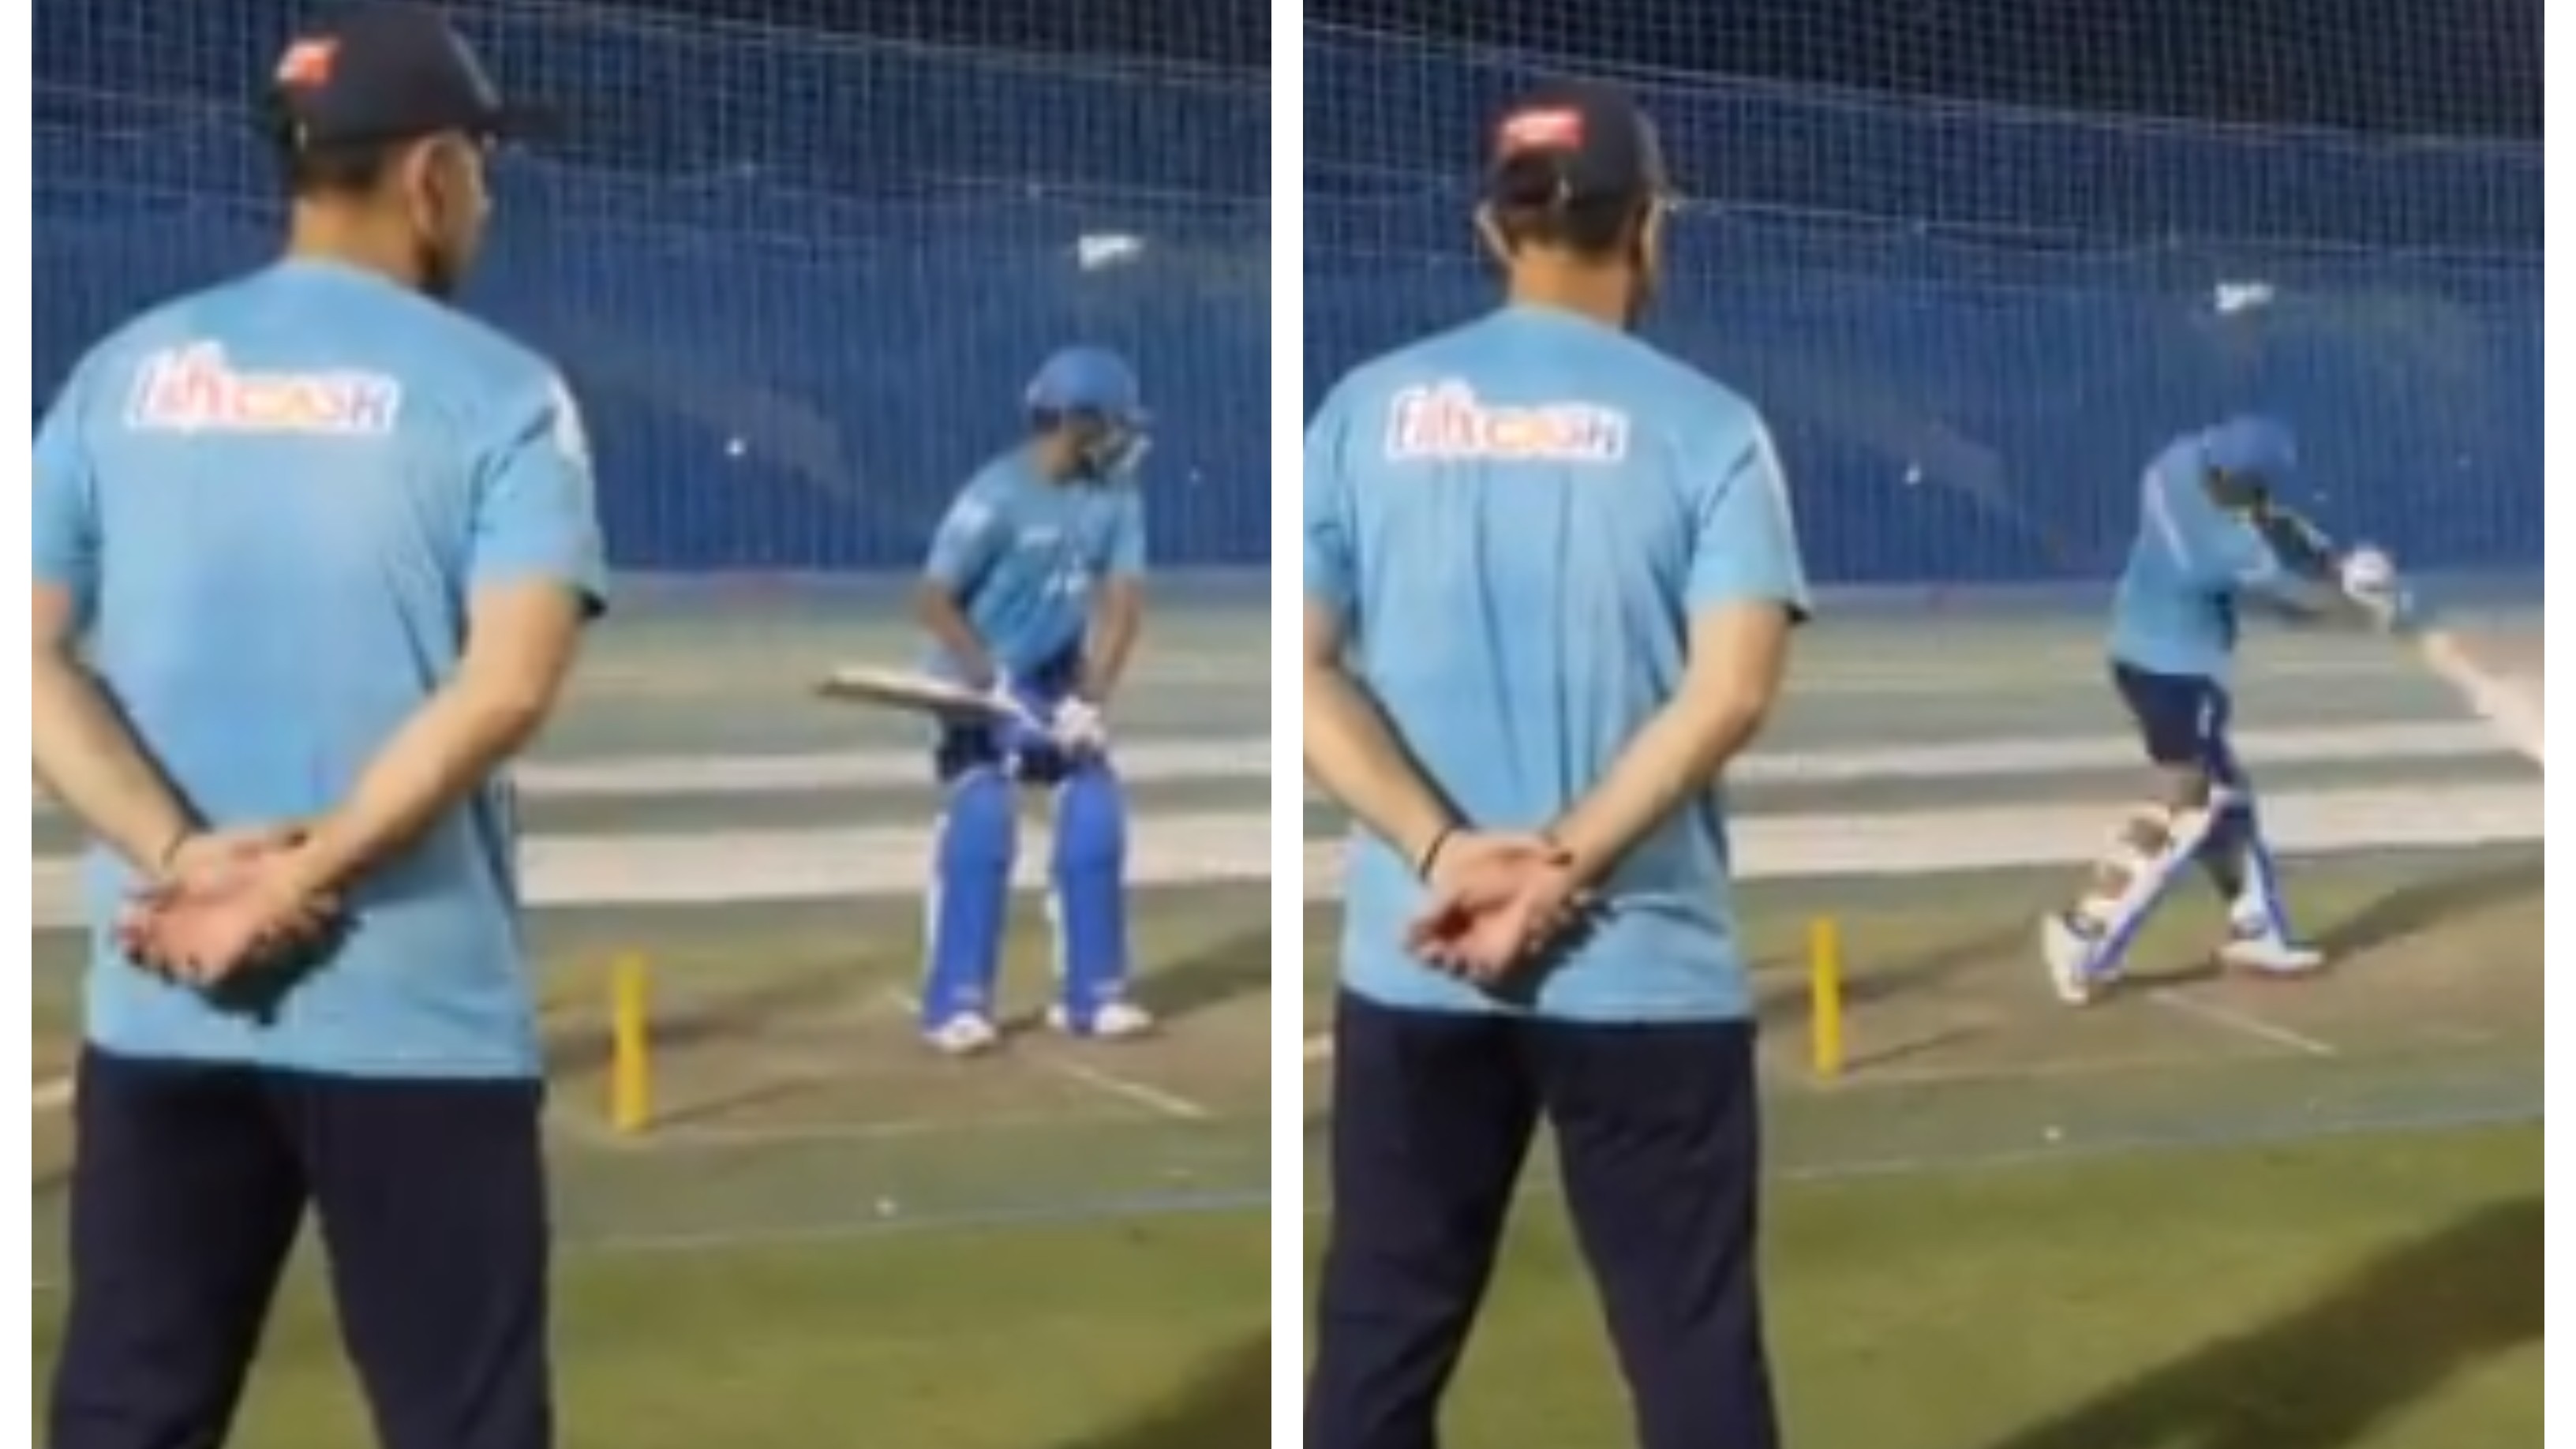 IPL 2020: WATCH – Ricky Ponting admires as Prithvi Shaw executes a jaw-dropping stroke in nets